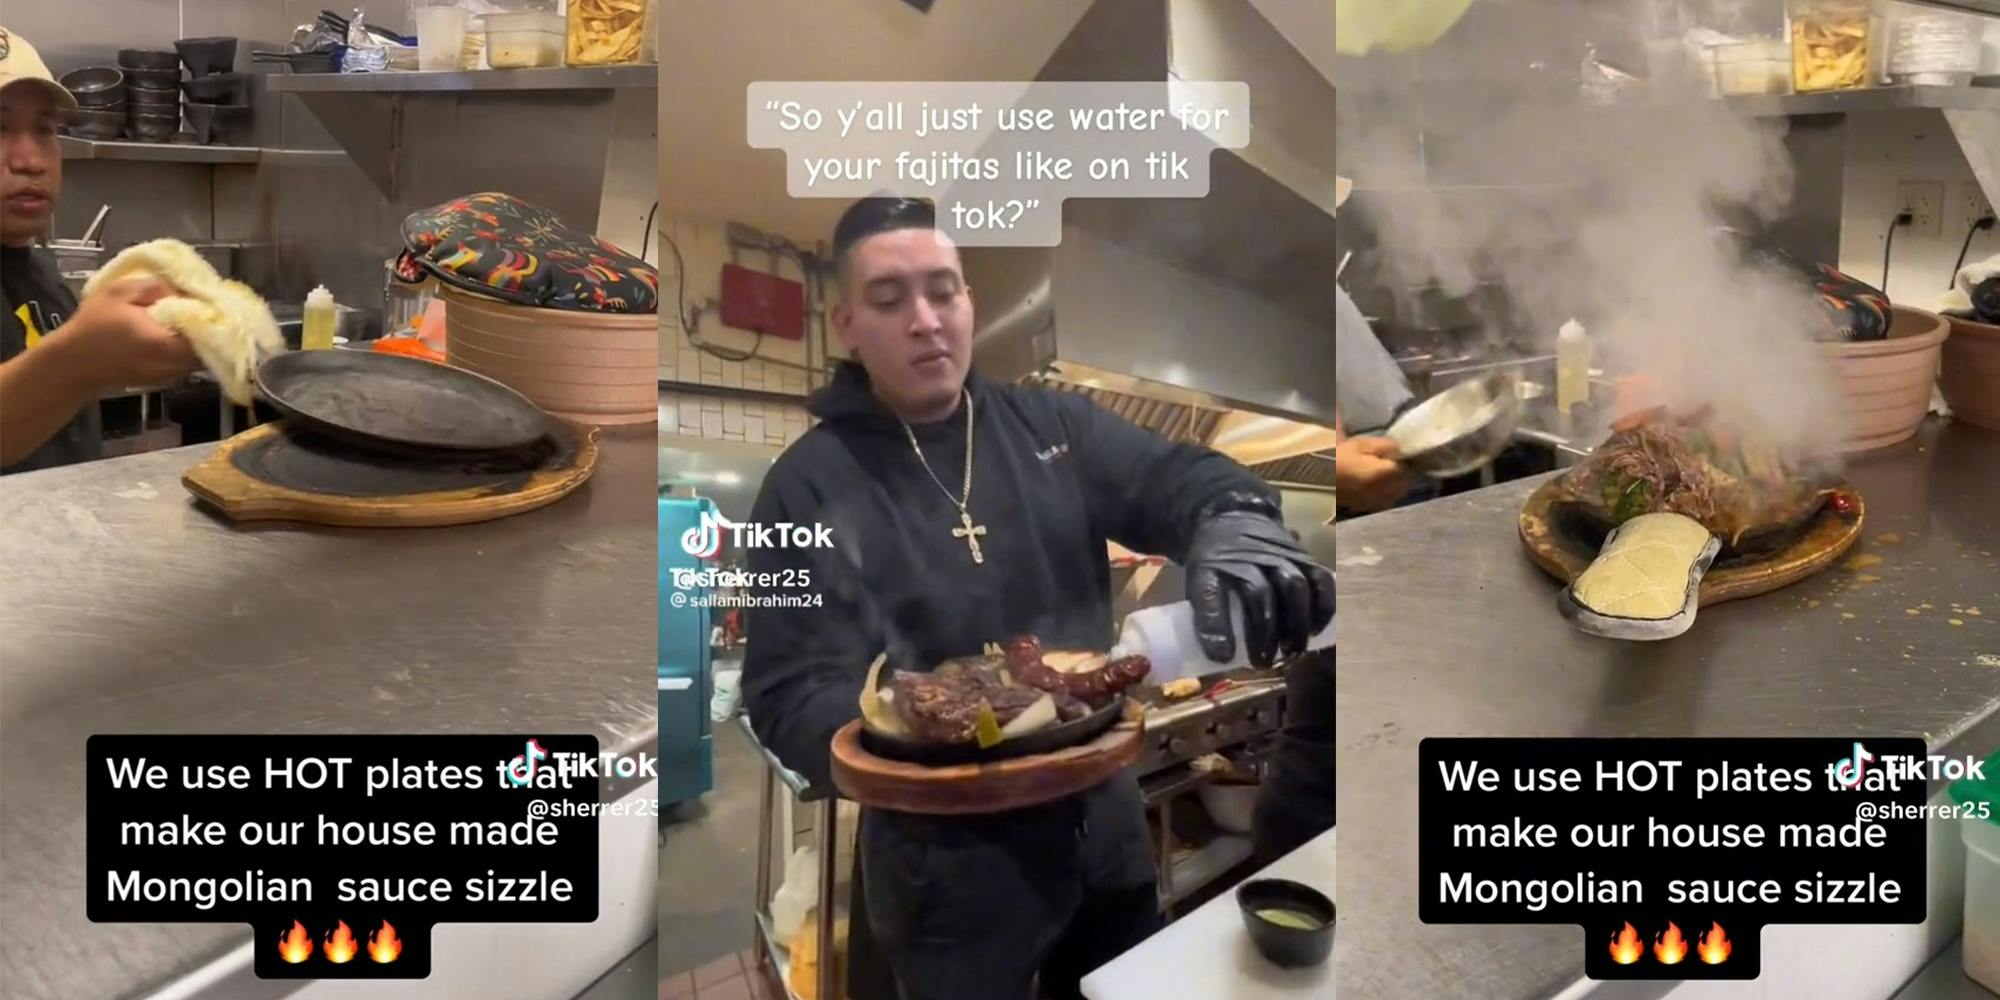 Worker explains what they use to make fajitas look like they are sizzling